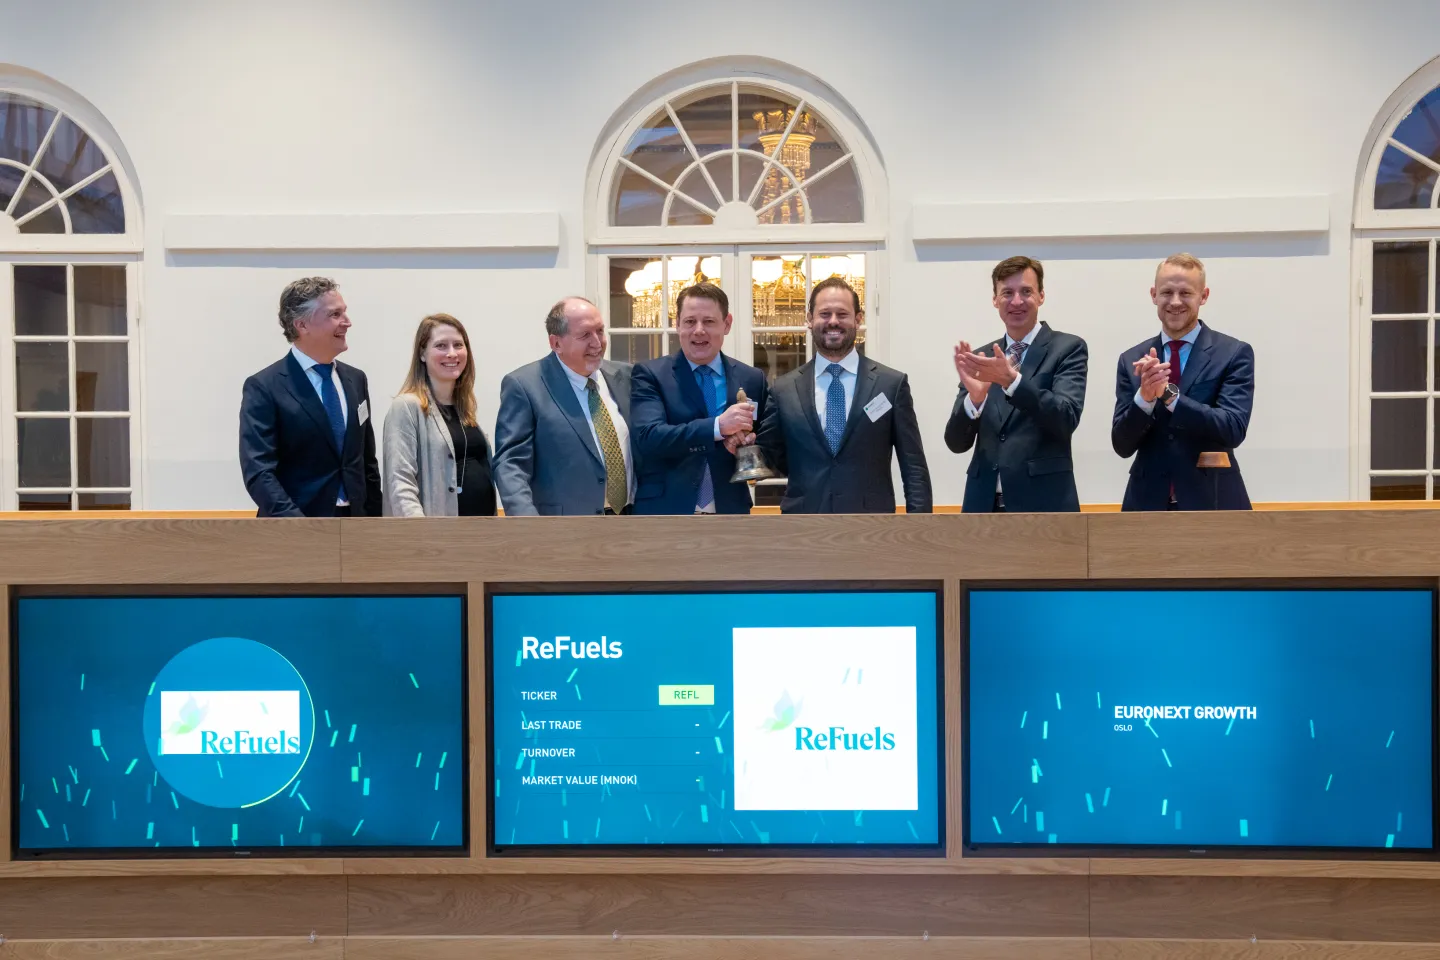 Philip Fjeld, CEO at ReFuels, and Baden Gowrie-Smith, CFO at ReFuels, rang the bell this morning to celebrate the company’s listing on Euronext Growth Oslo. They were welcomed by Øivind Amundsen, CEO at Oslo Børs (Photo: Thomas Brun/ NTB).